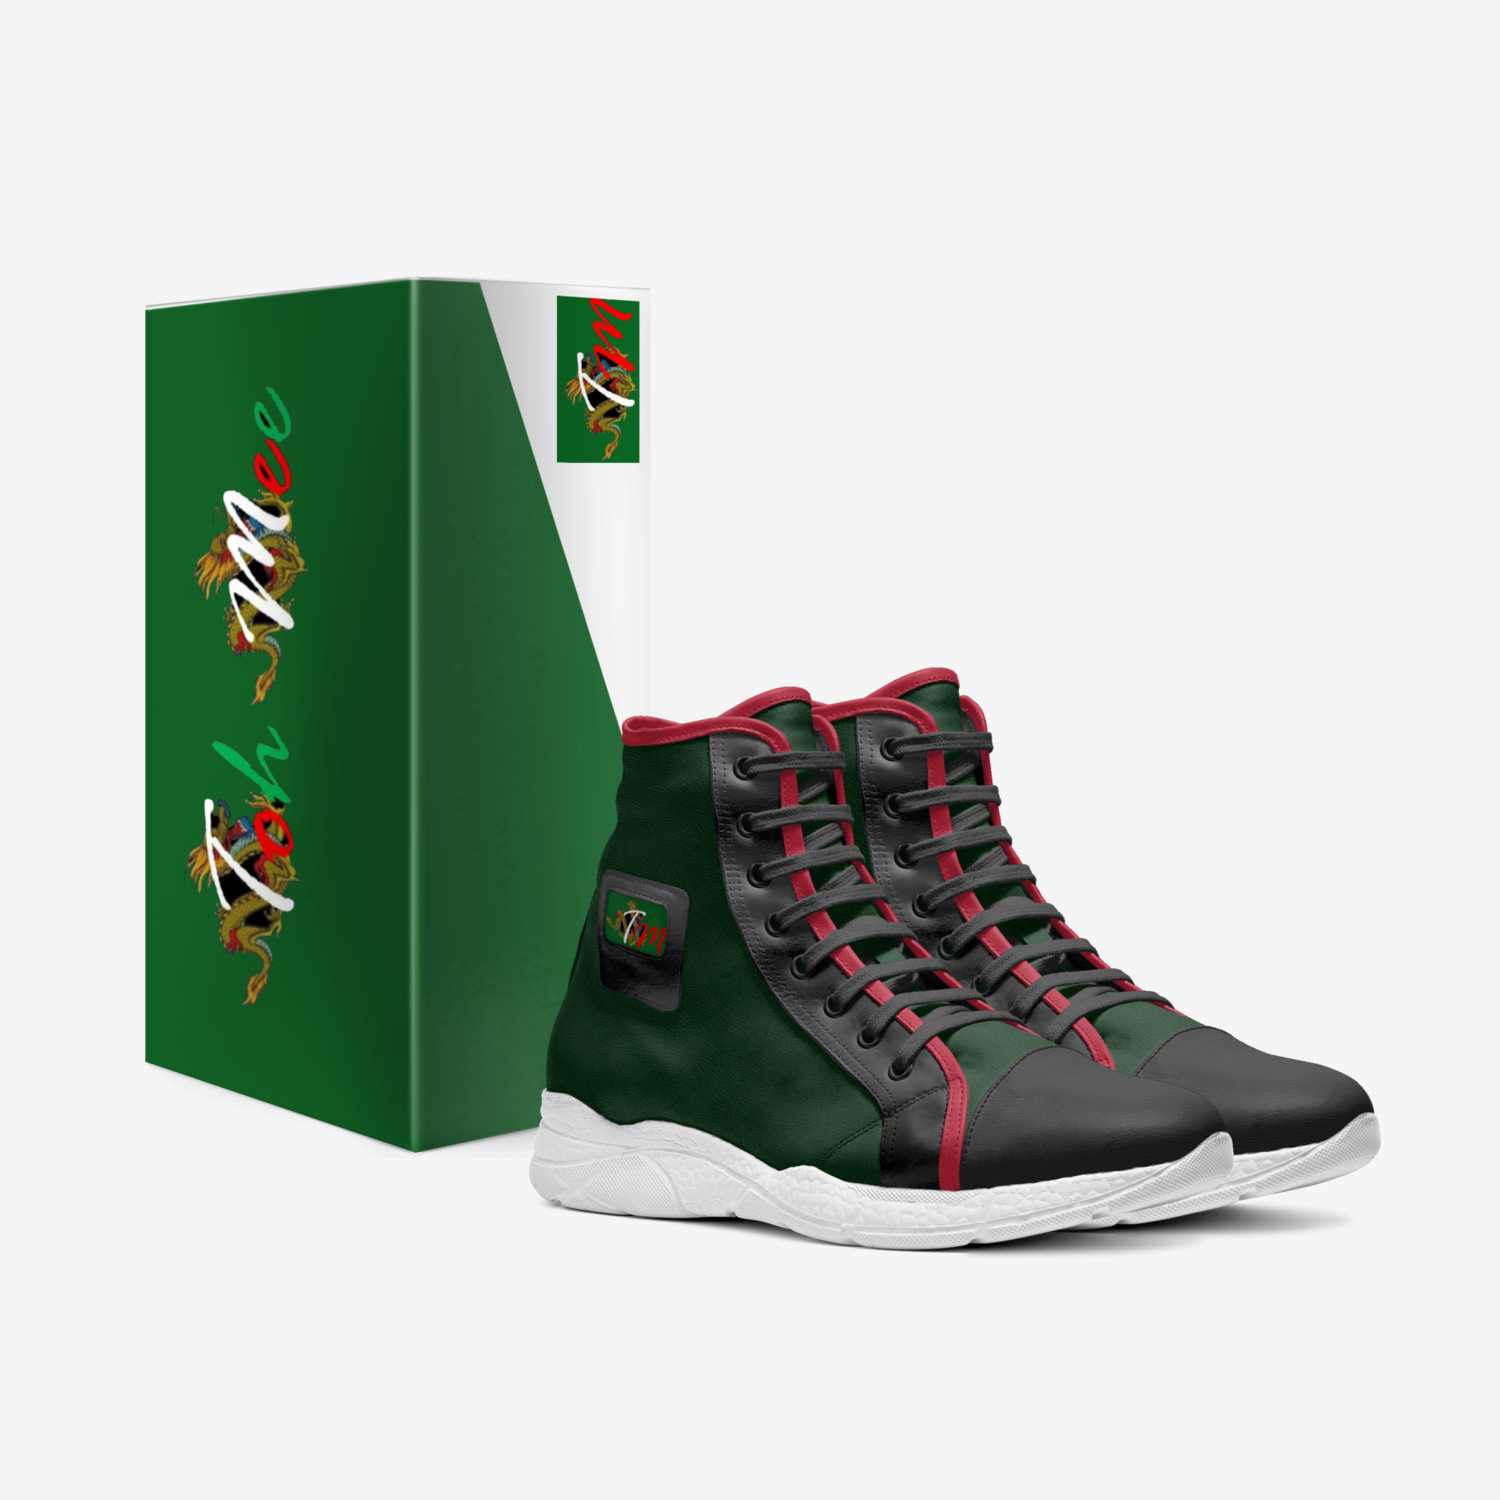 Buya2 custom made in Italy shoes by William Lingham | Box view